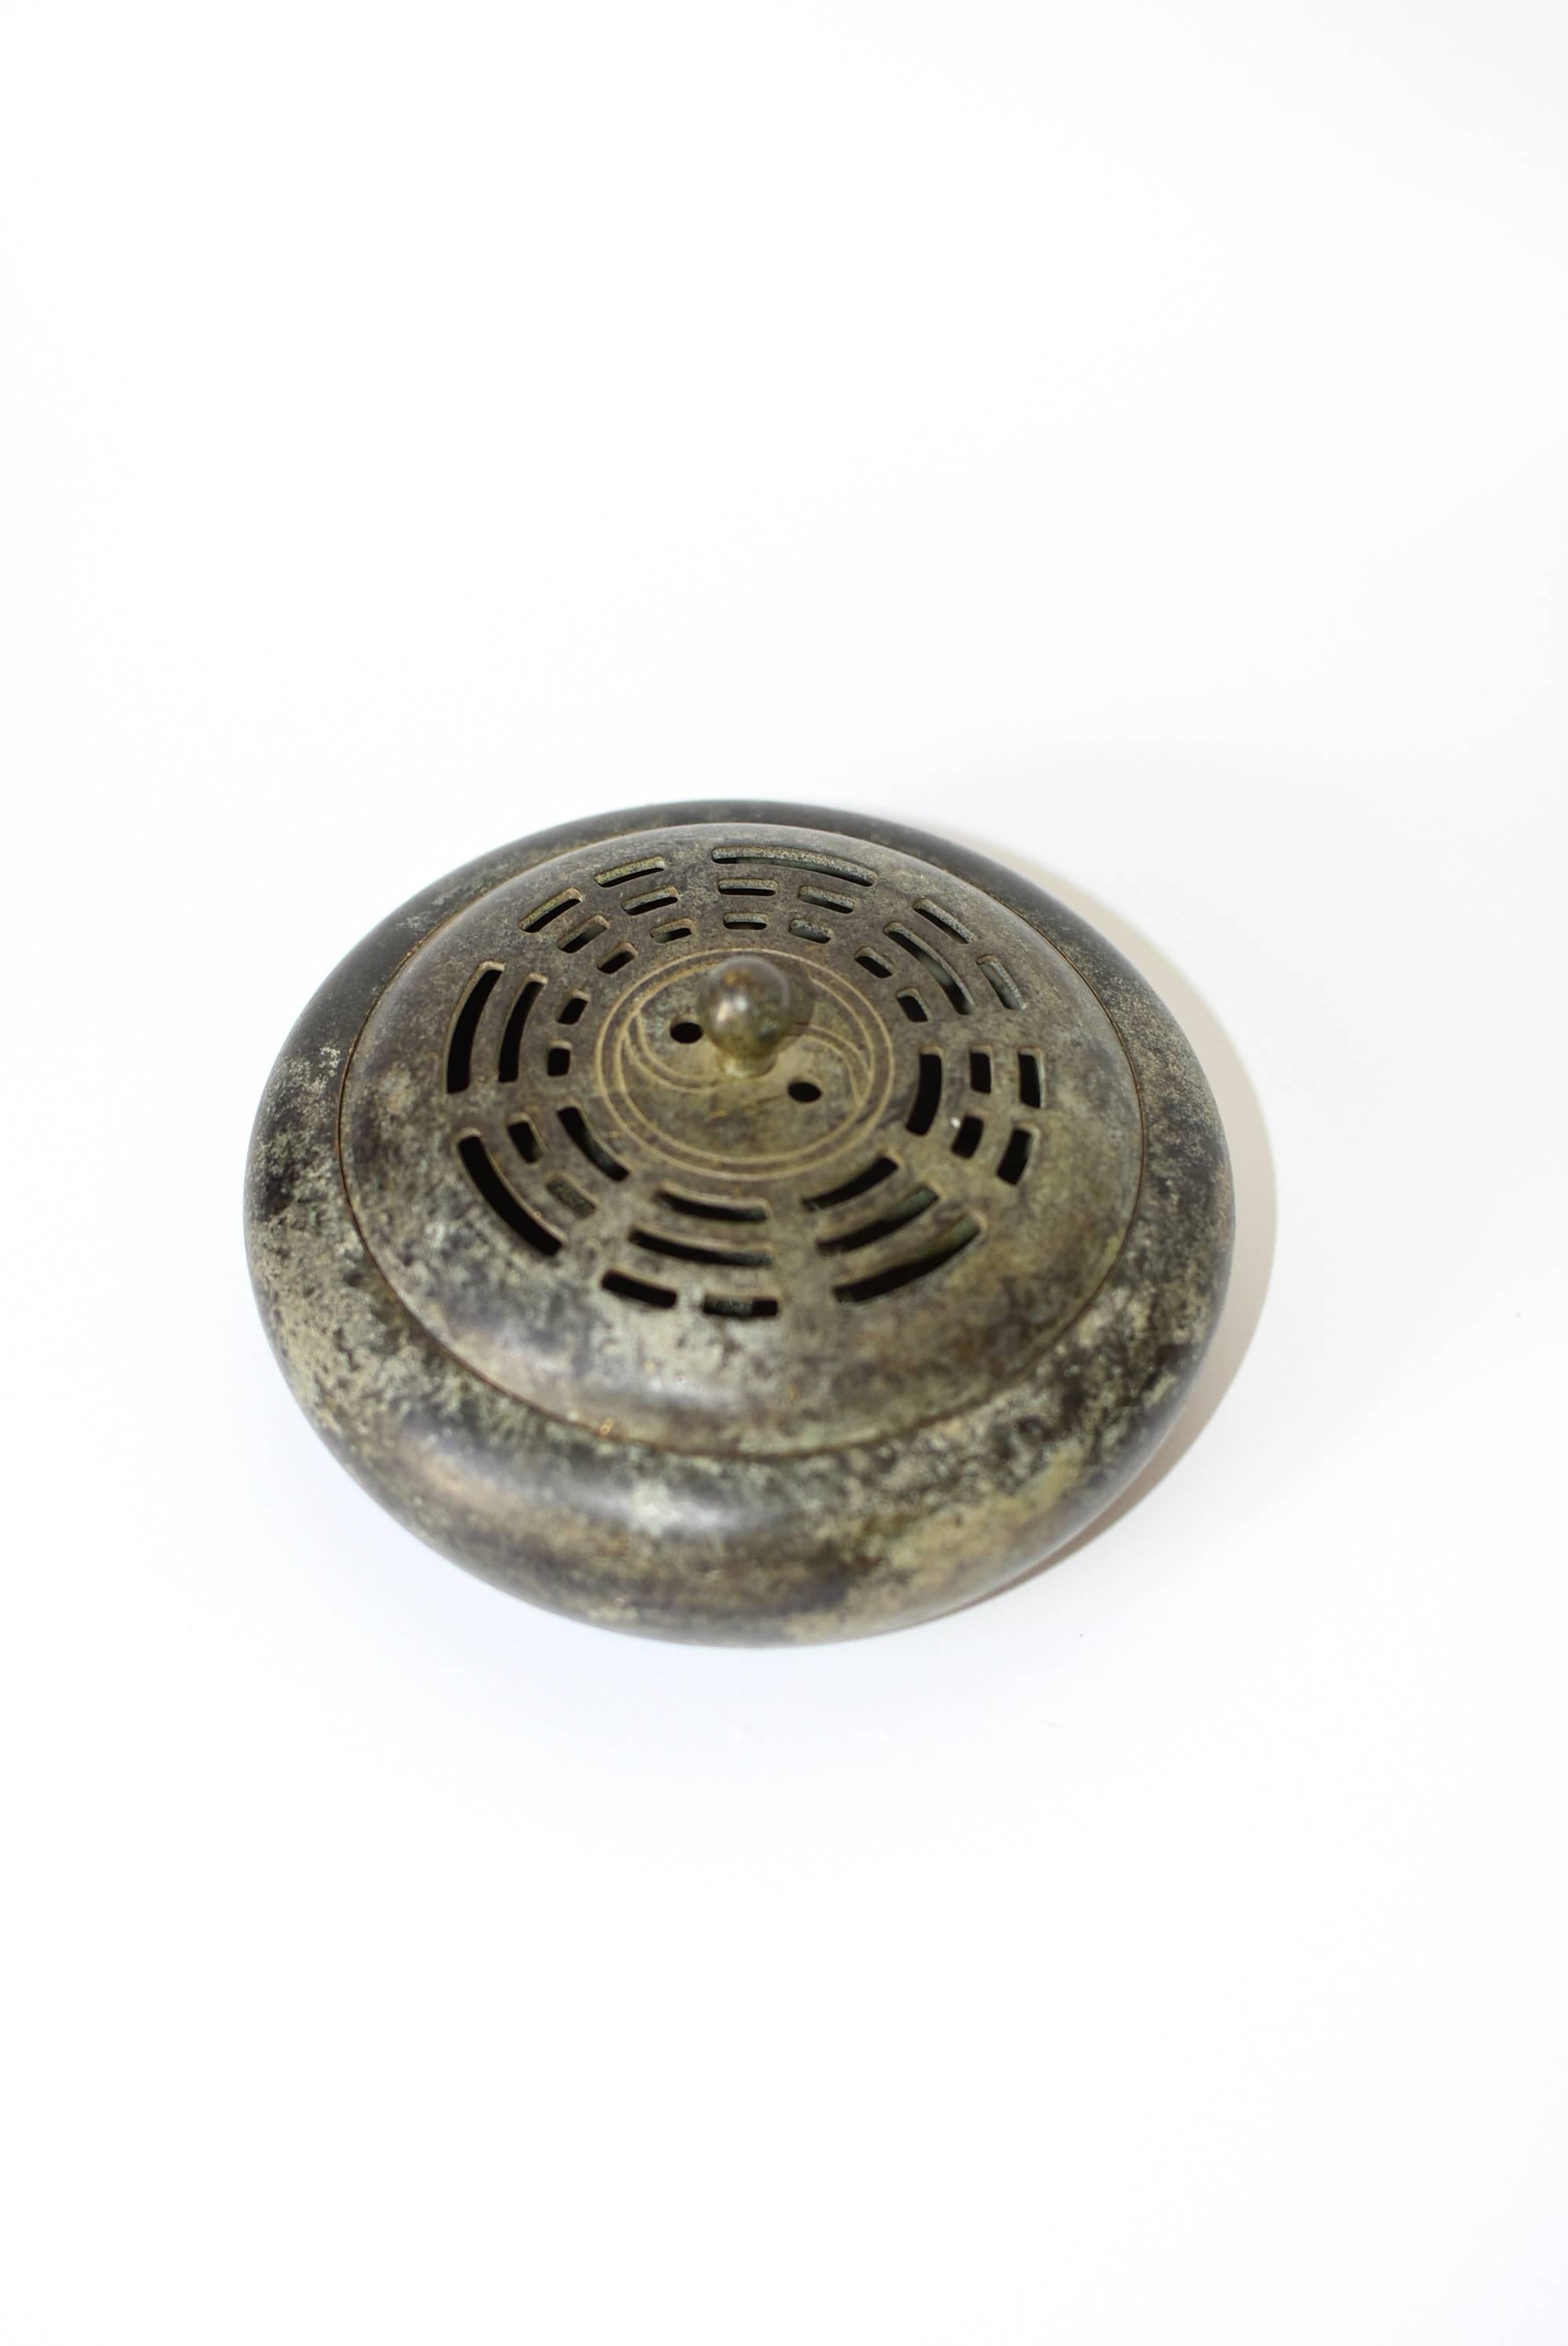 Exquisite Qin dynasty incense burner features the coveted Ba-Gua Yin Yan Zen pattern. Such a design is believed to harmonize air and balance energy. Used in an incense burner, the smoke is guided out of the burner through the slots that formed the